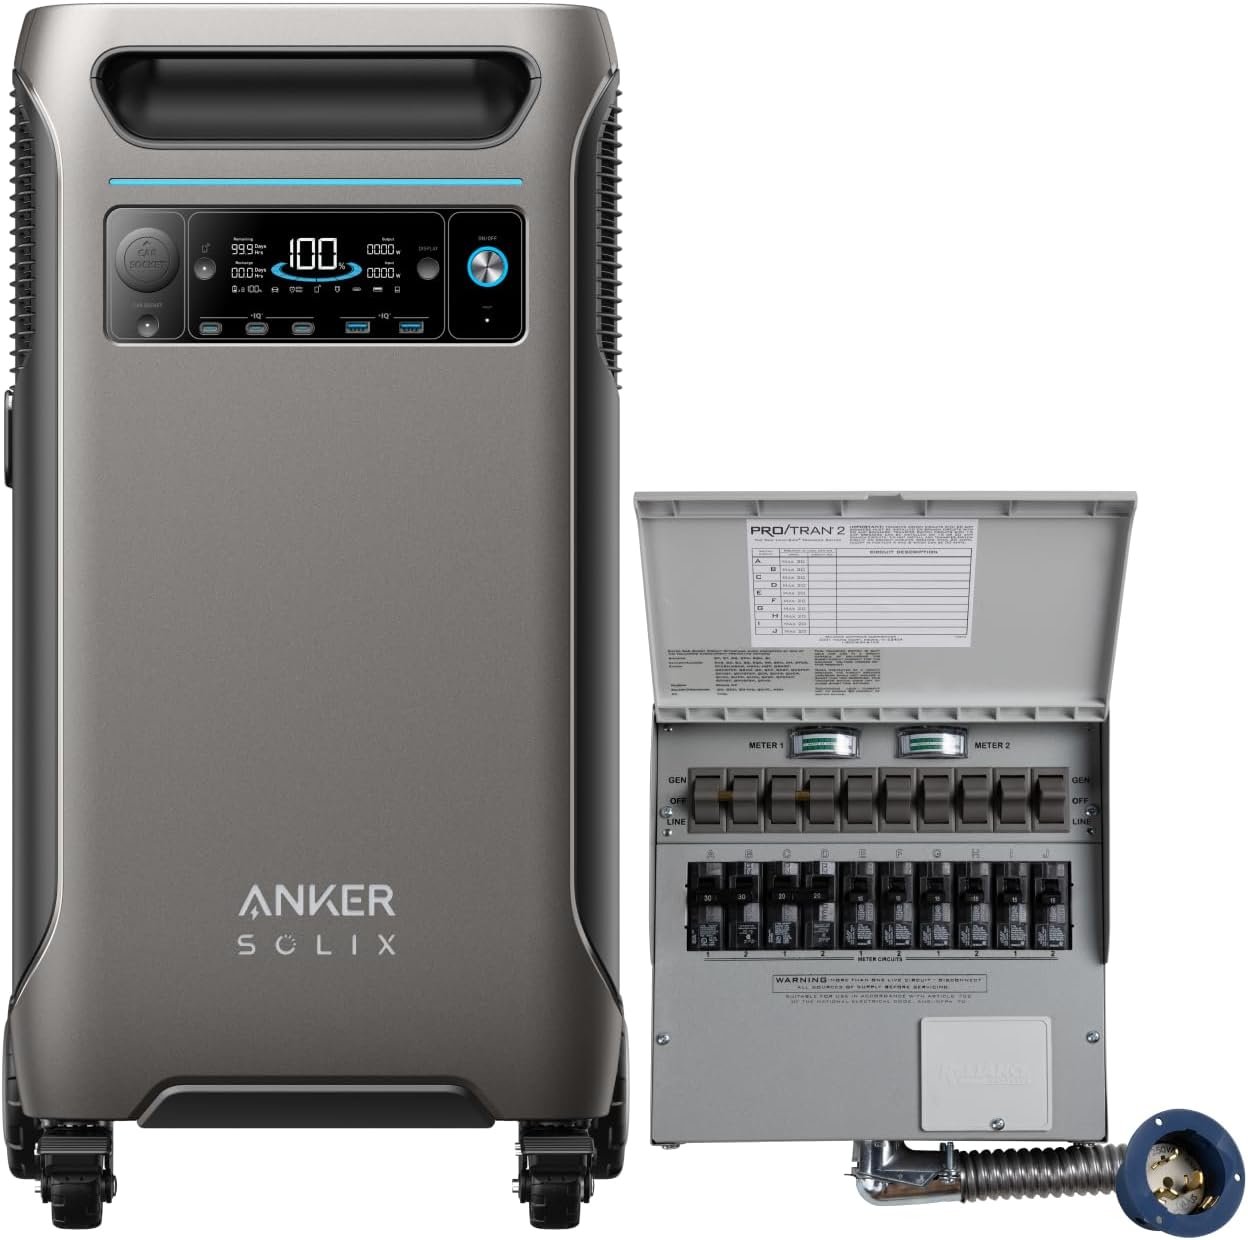 Anker SOLIX F3800 Power Station Review